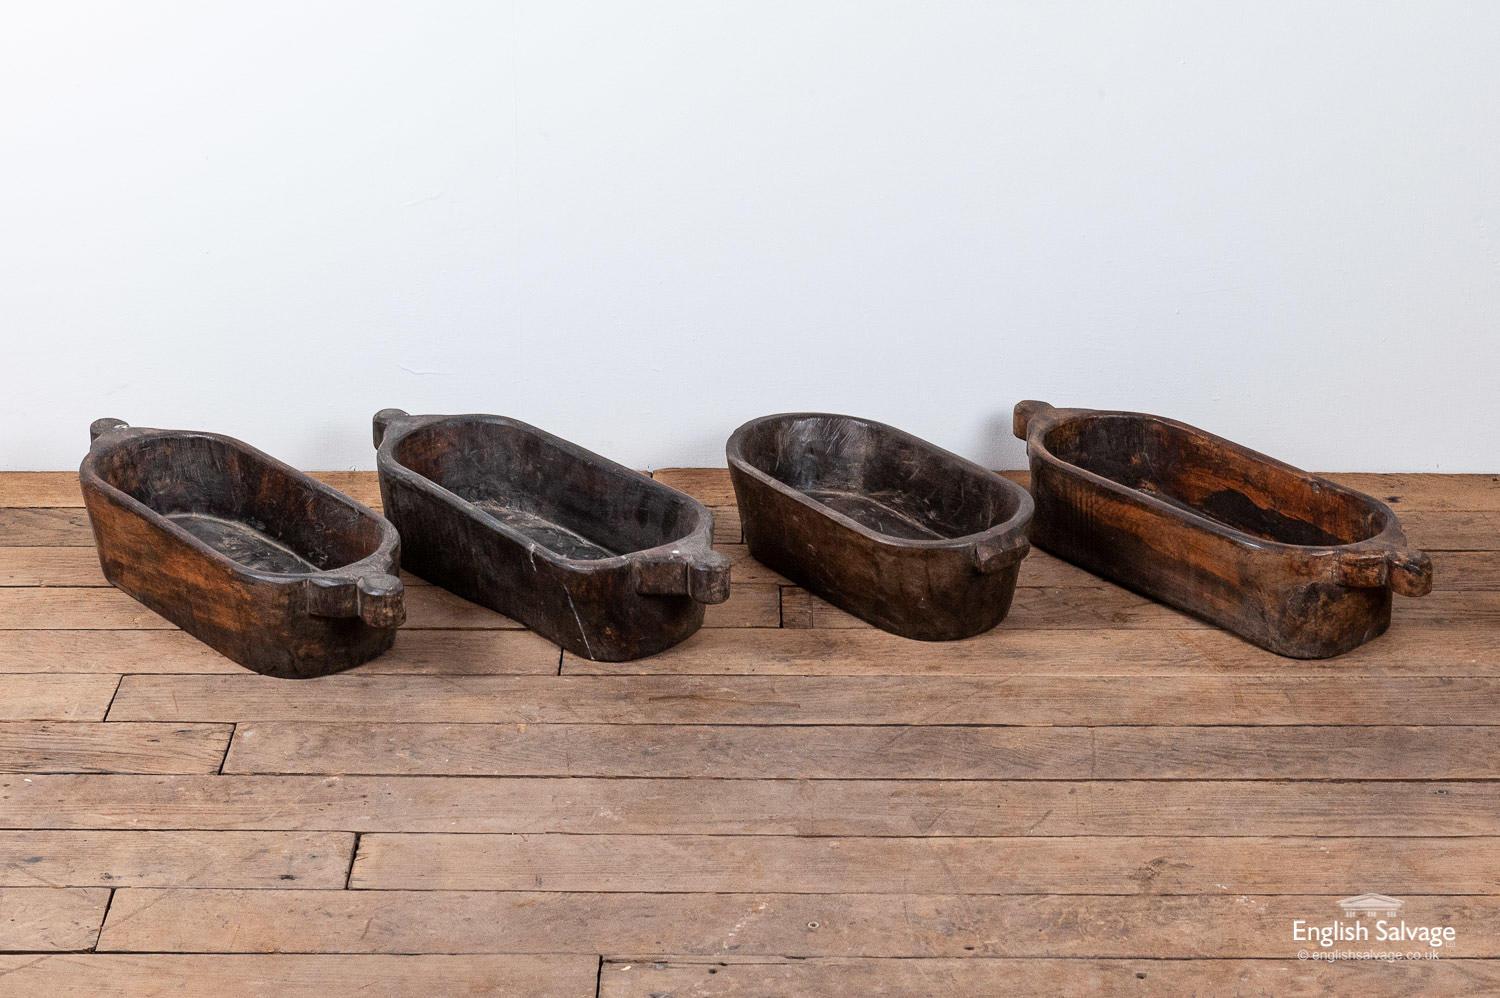 Carved Indian rustic hardwood long bowls with handles. Good weight to them. Being hand carved each piece will be slightly different in size and style - no two will be the same. Great for storage or display or even as plant pot holders. Measurements